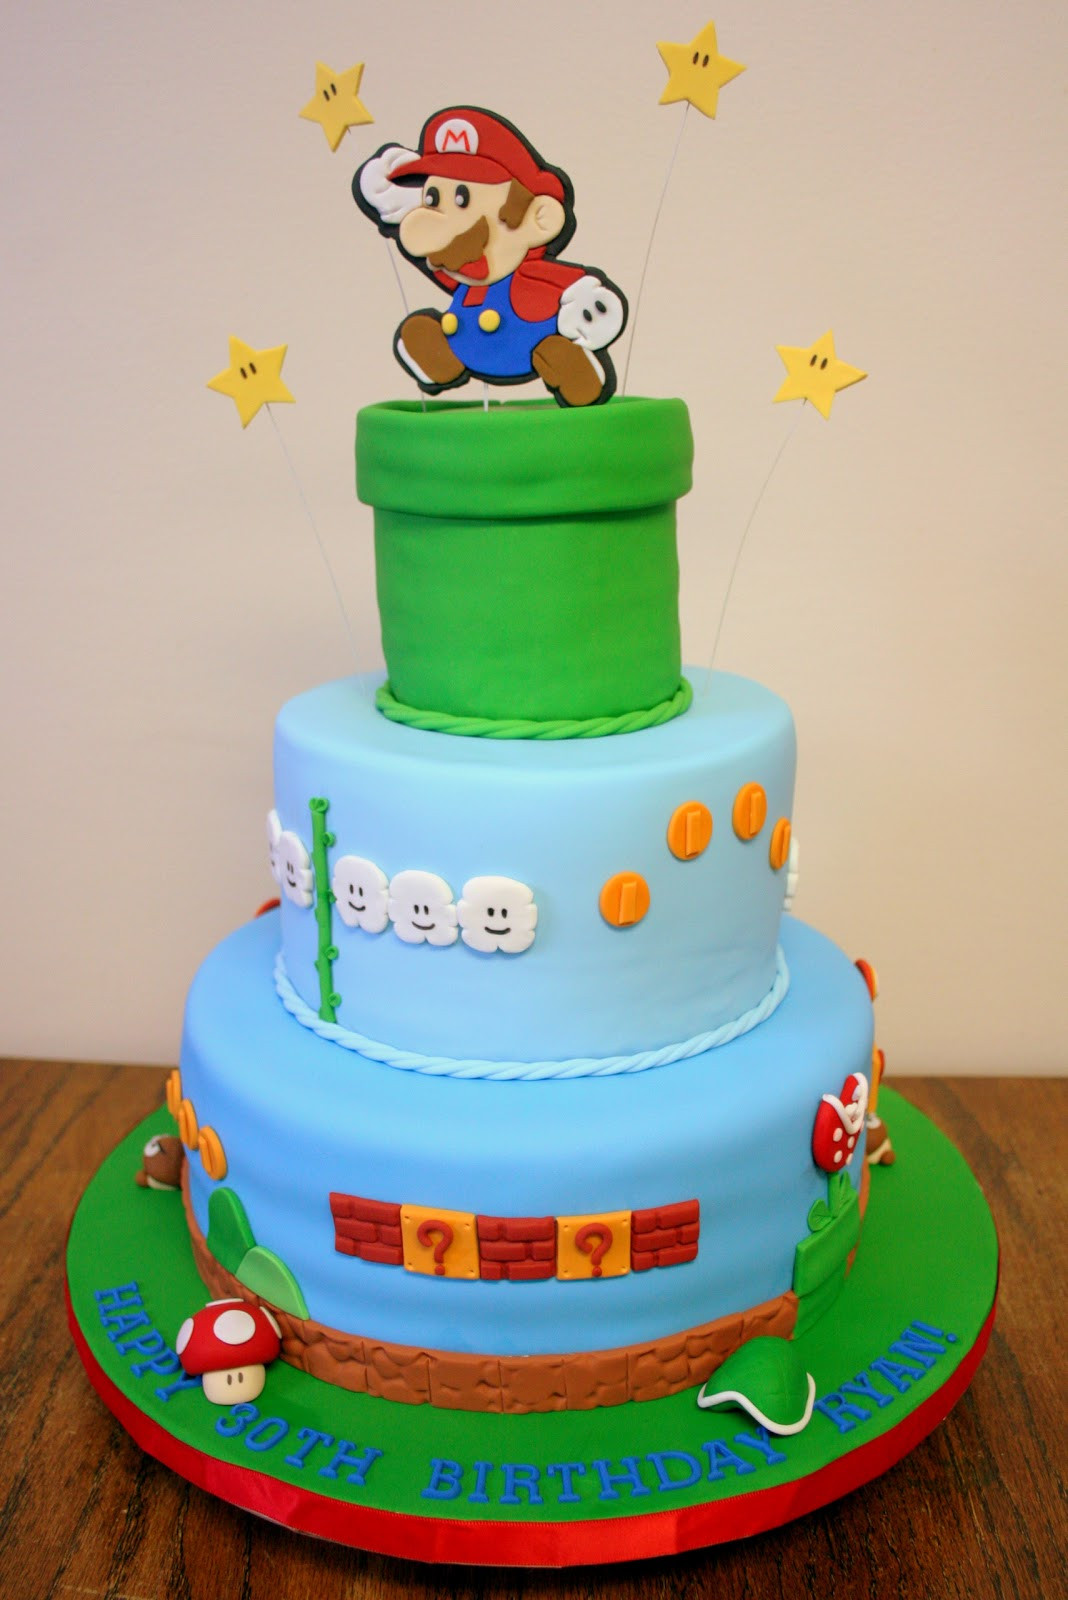 Super Mario Birthday Cake
 Stuff By Stace Super Mario Brothers Cake